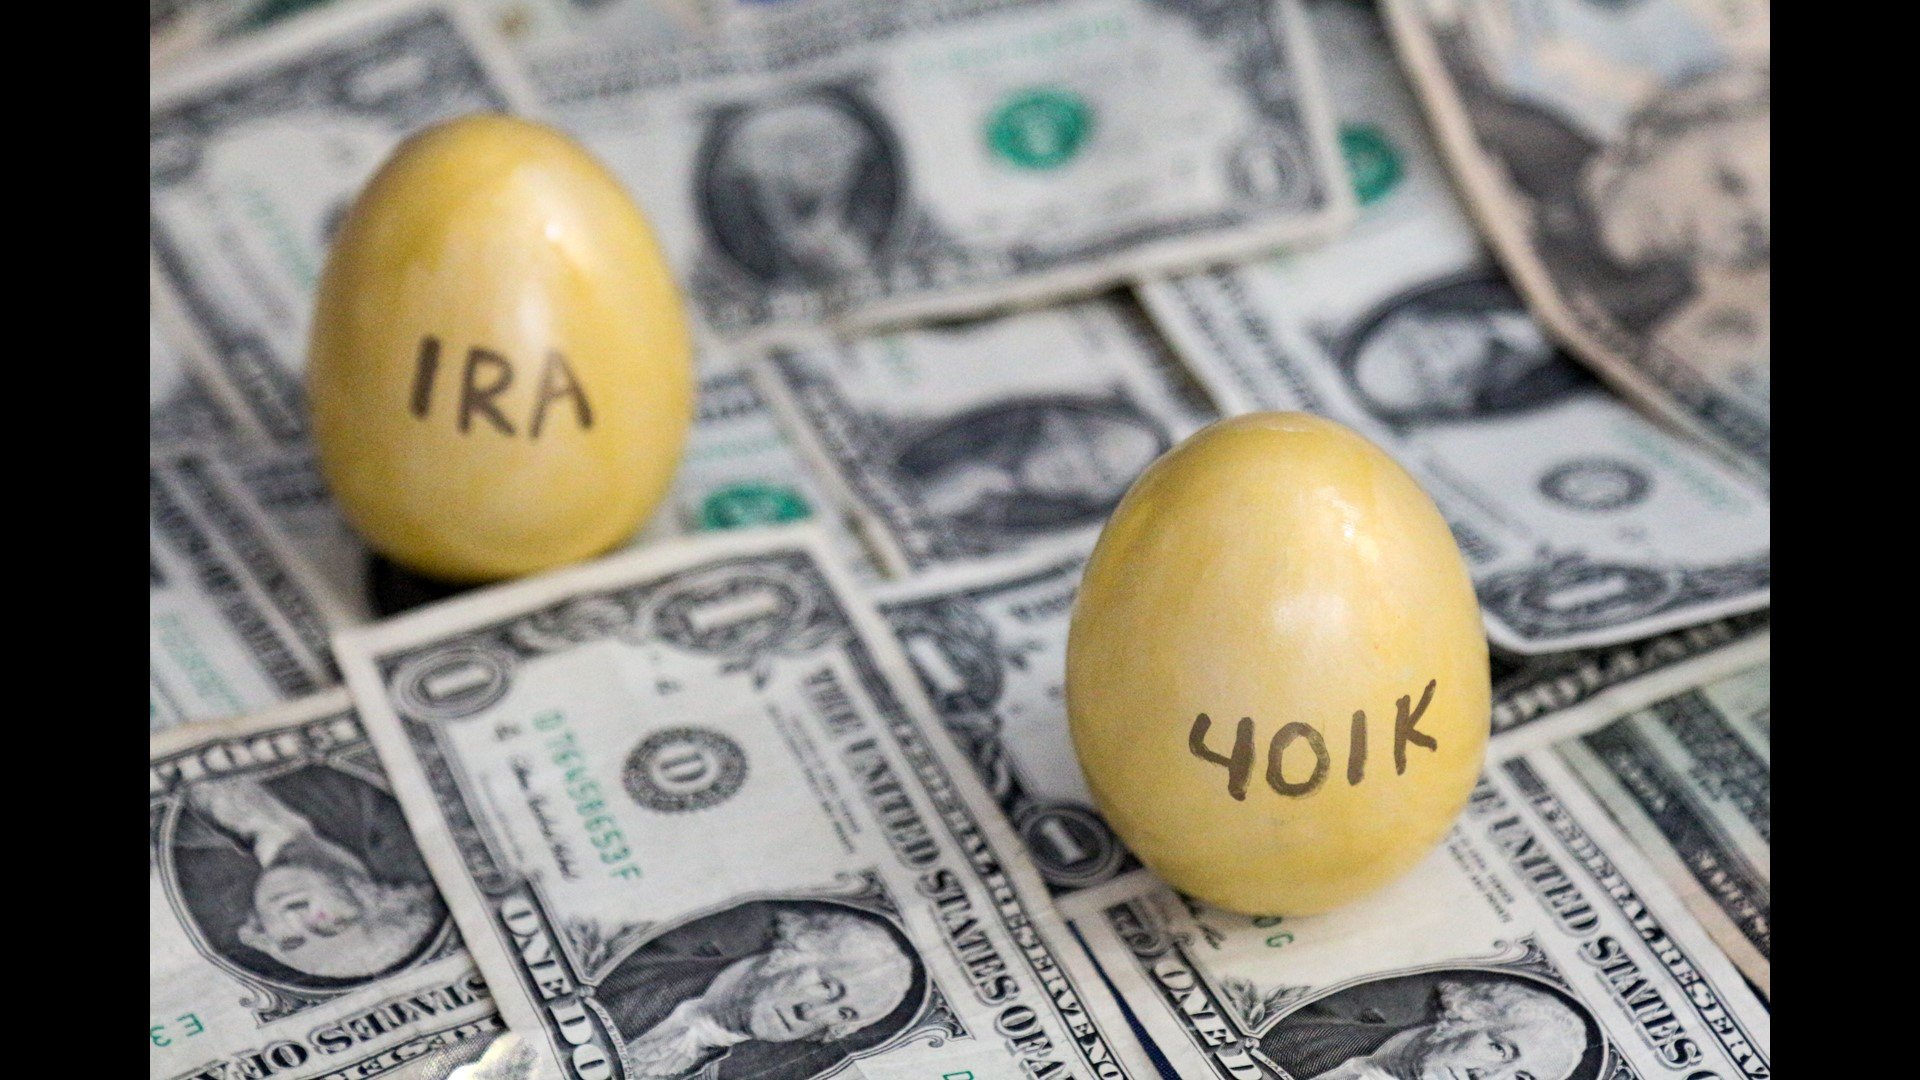 What to do with your 401(k) plan? Consider moving it to an IRA